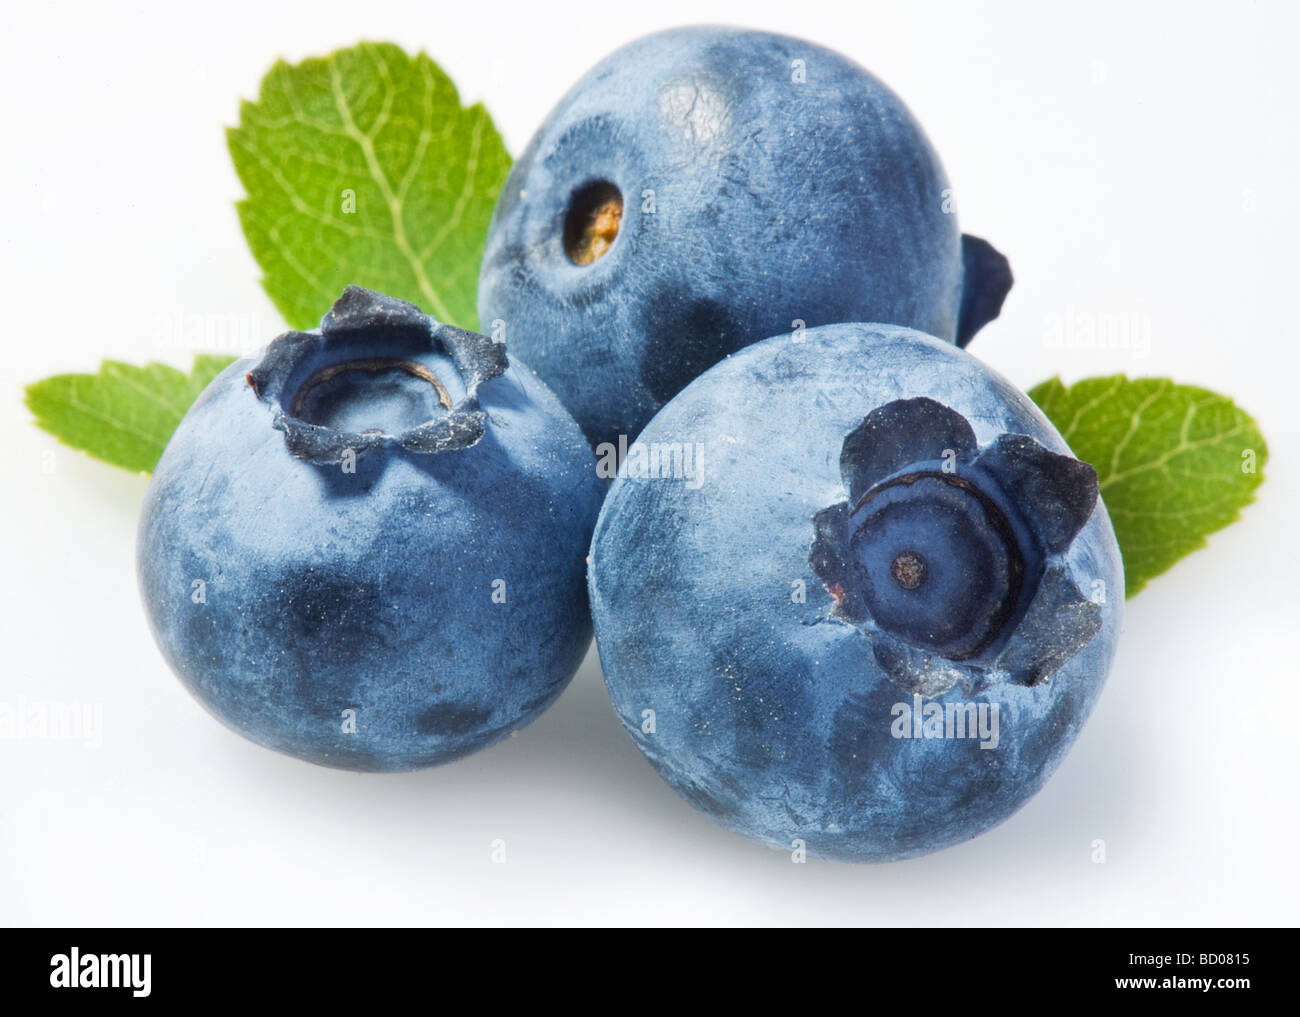 Bilberry on a white background Stock Photo